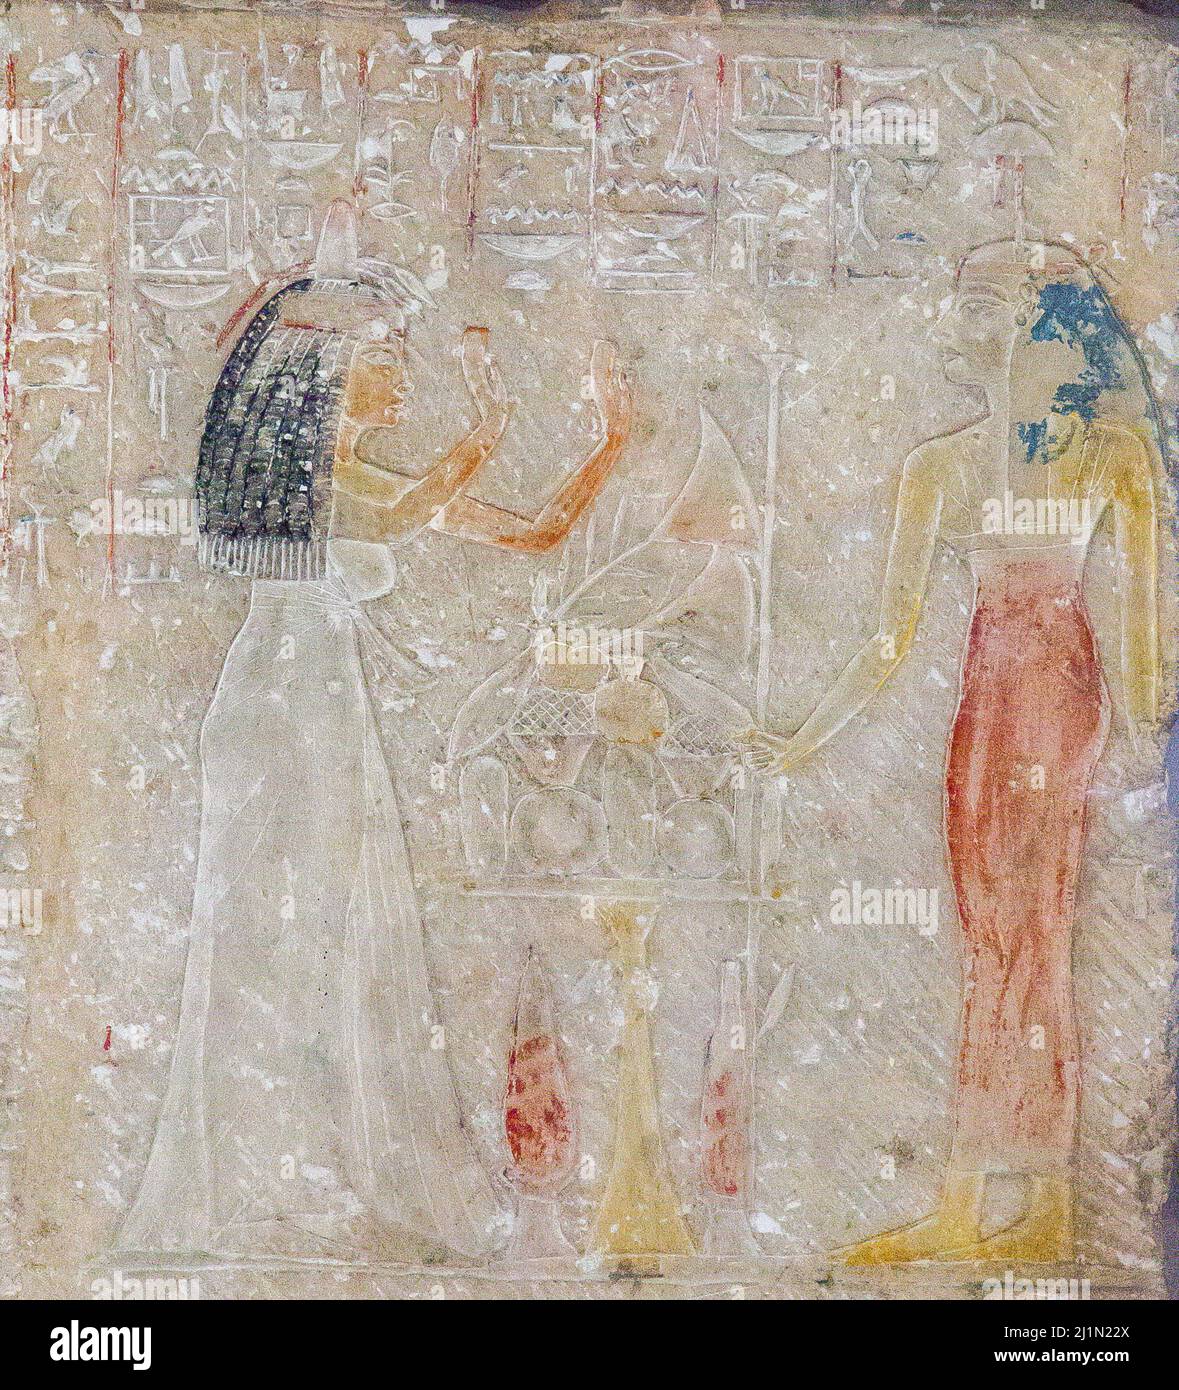 Cairo, Egyptian Museum, relief of Merya and Sitti, found in Saqqara : Sitti adoring Hathor. The block was reused as pavement in another tomb. Stock Photo